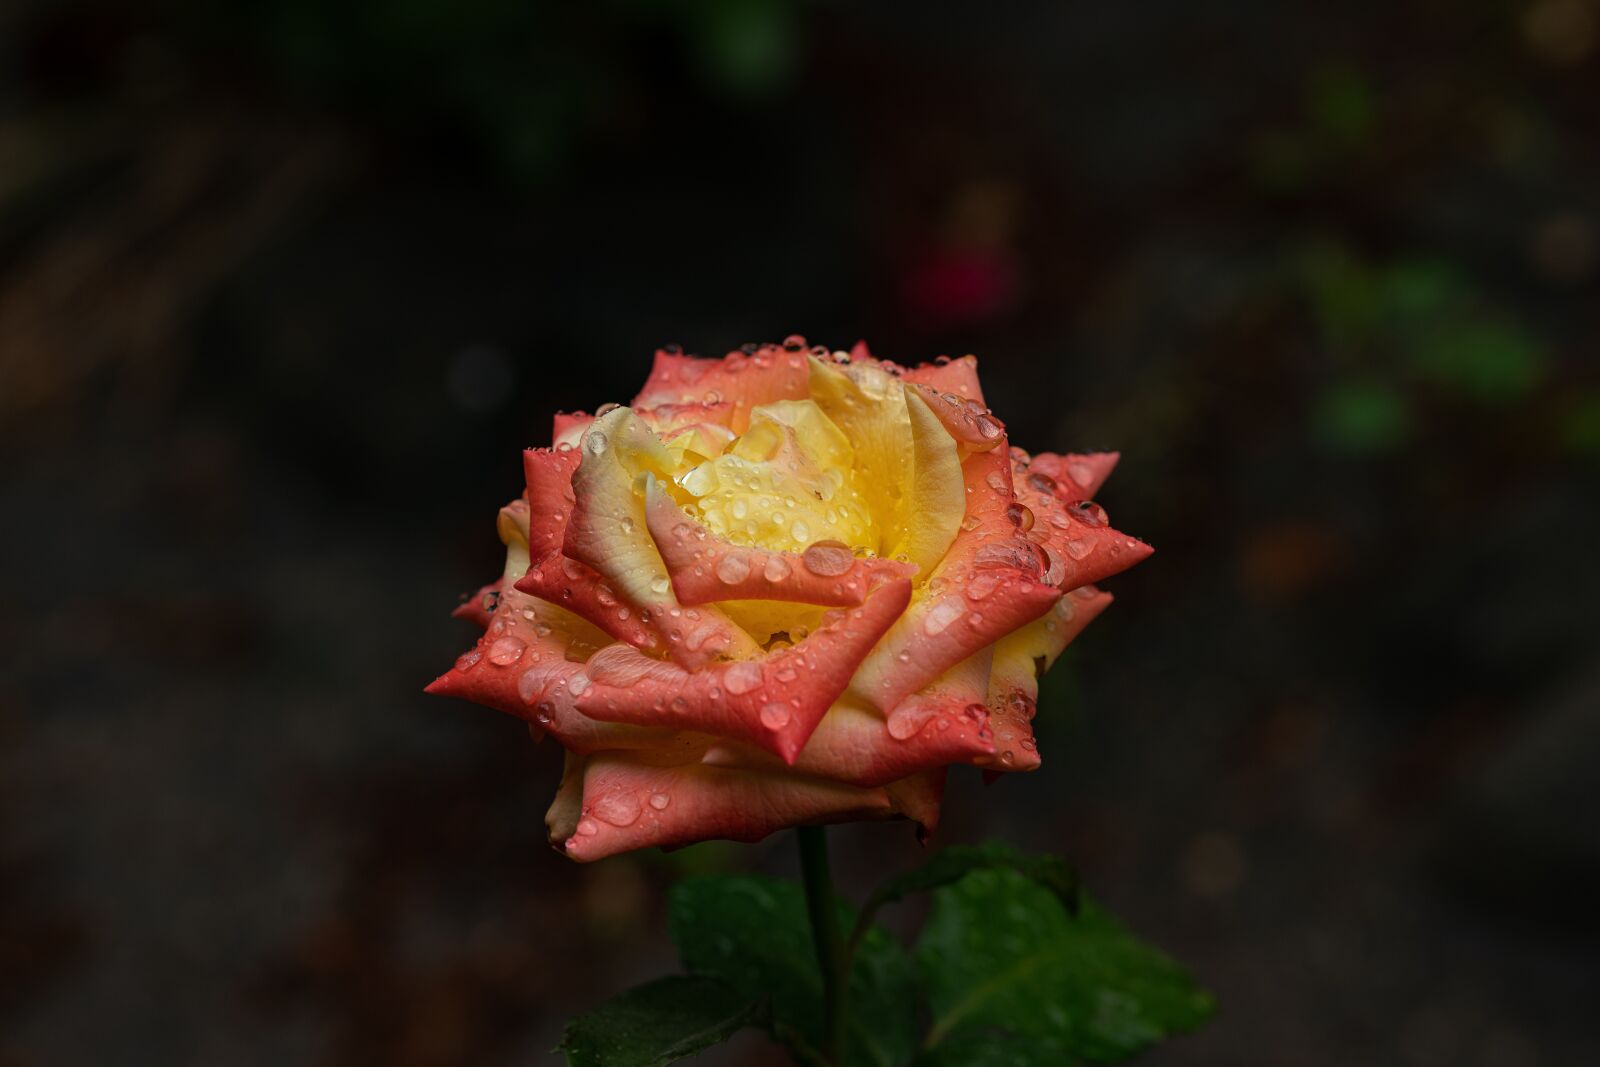 105mm F2.8 sample photo. Color, rose, bloom photography